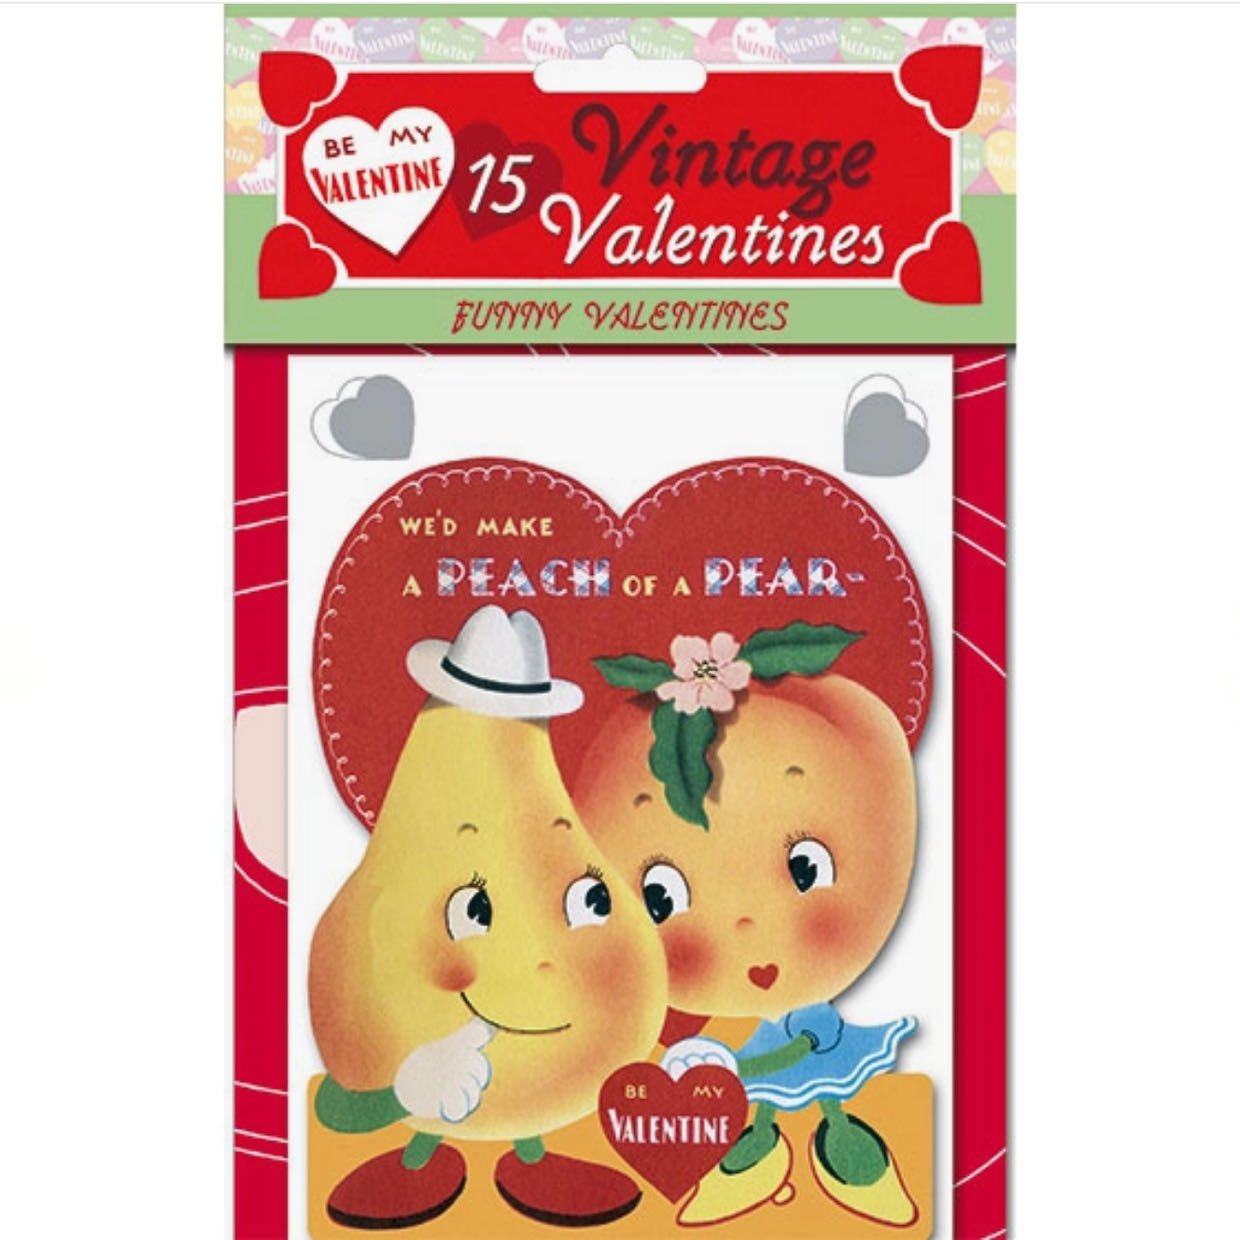 Vintage Valentine's Day Cards Collection